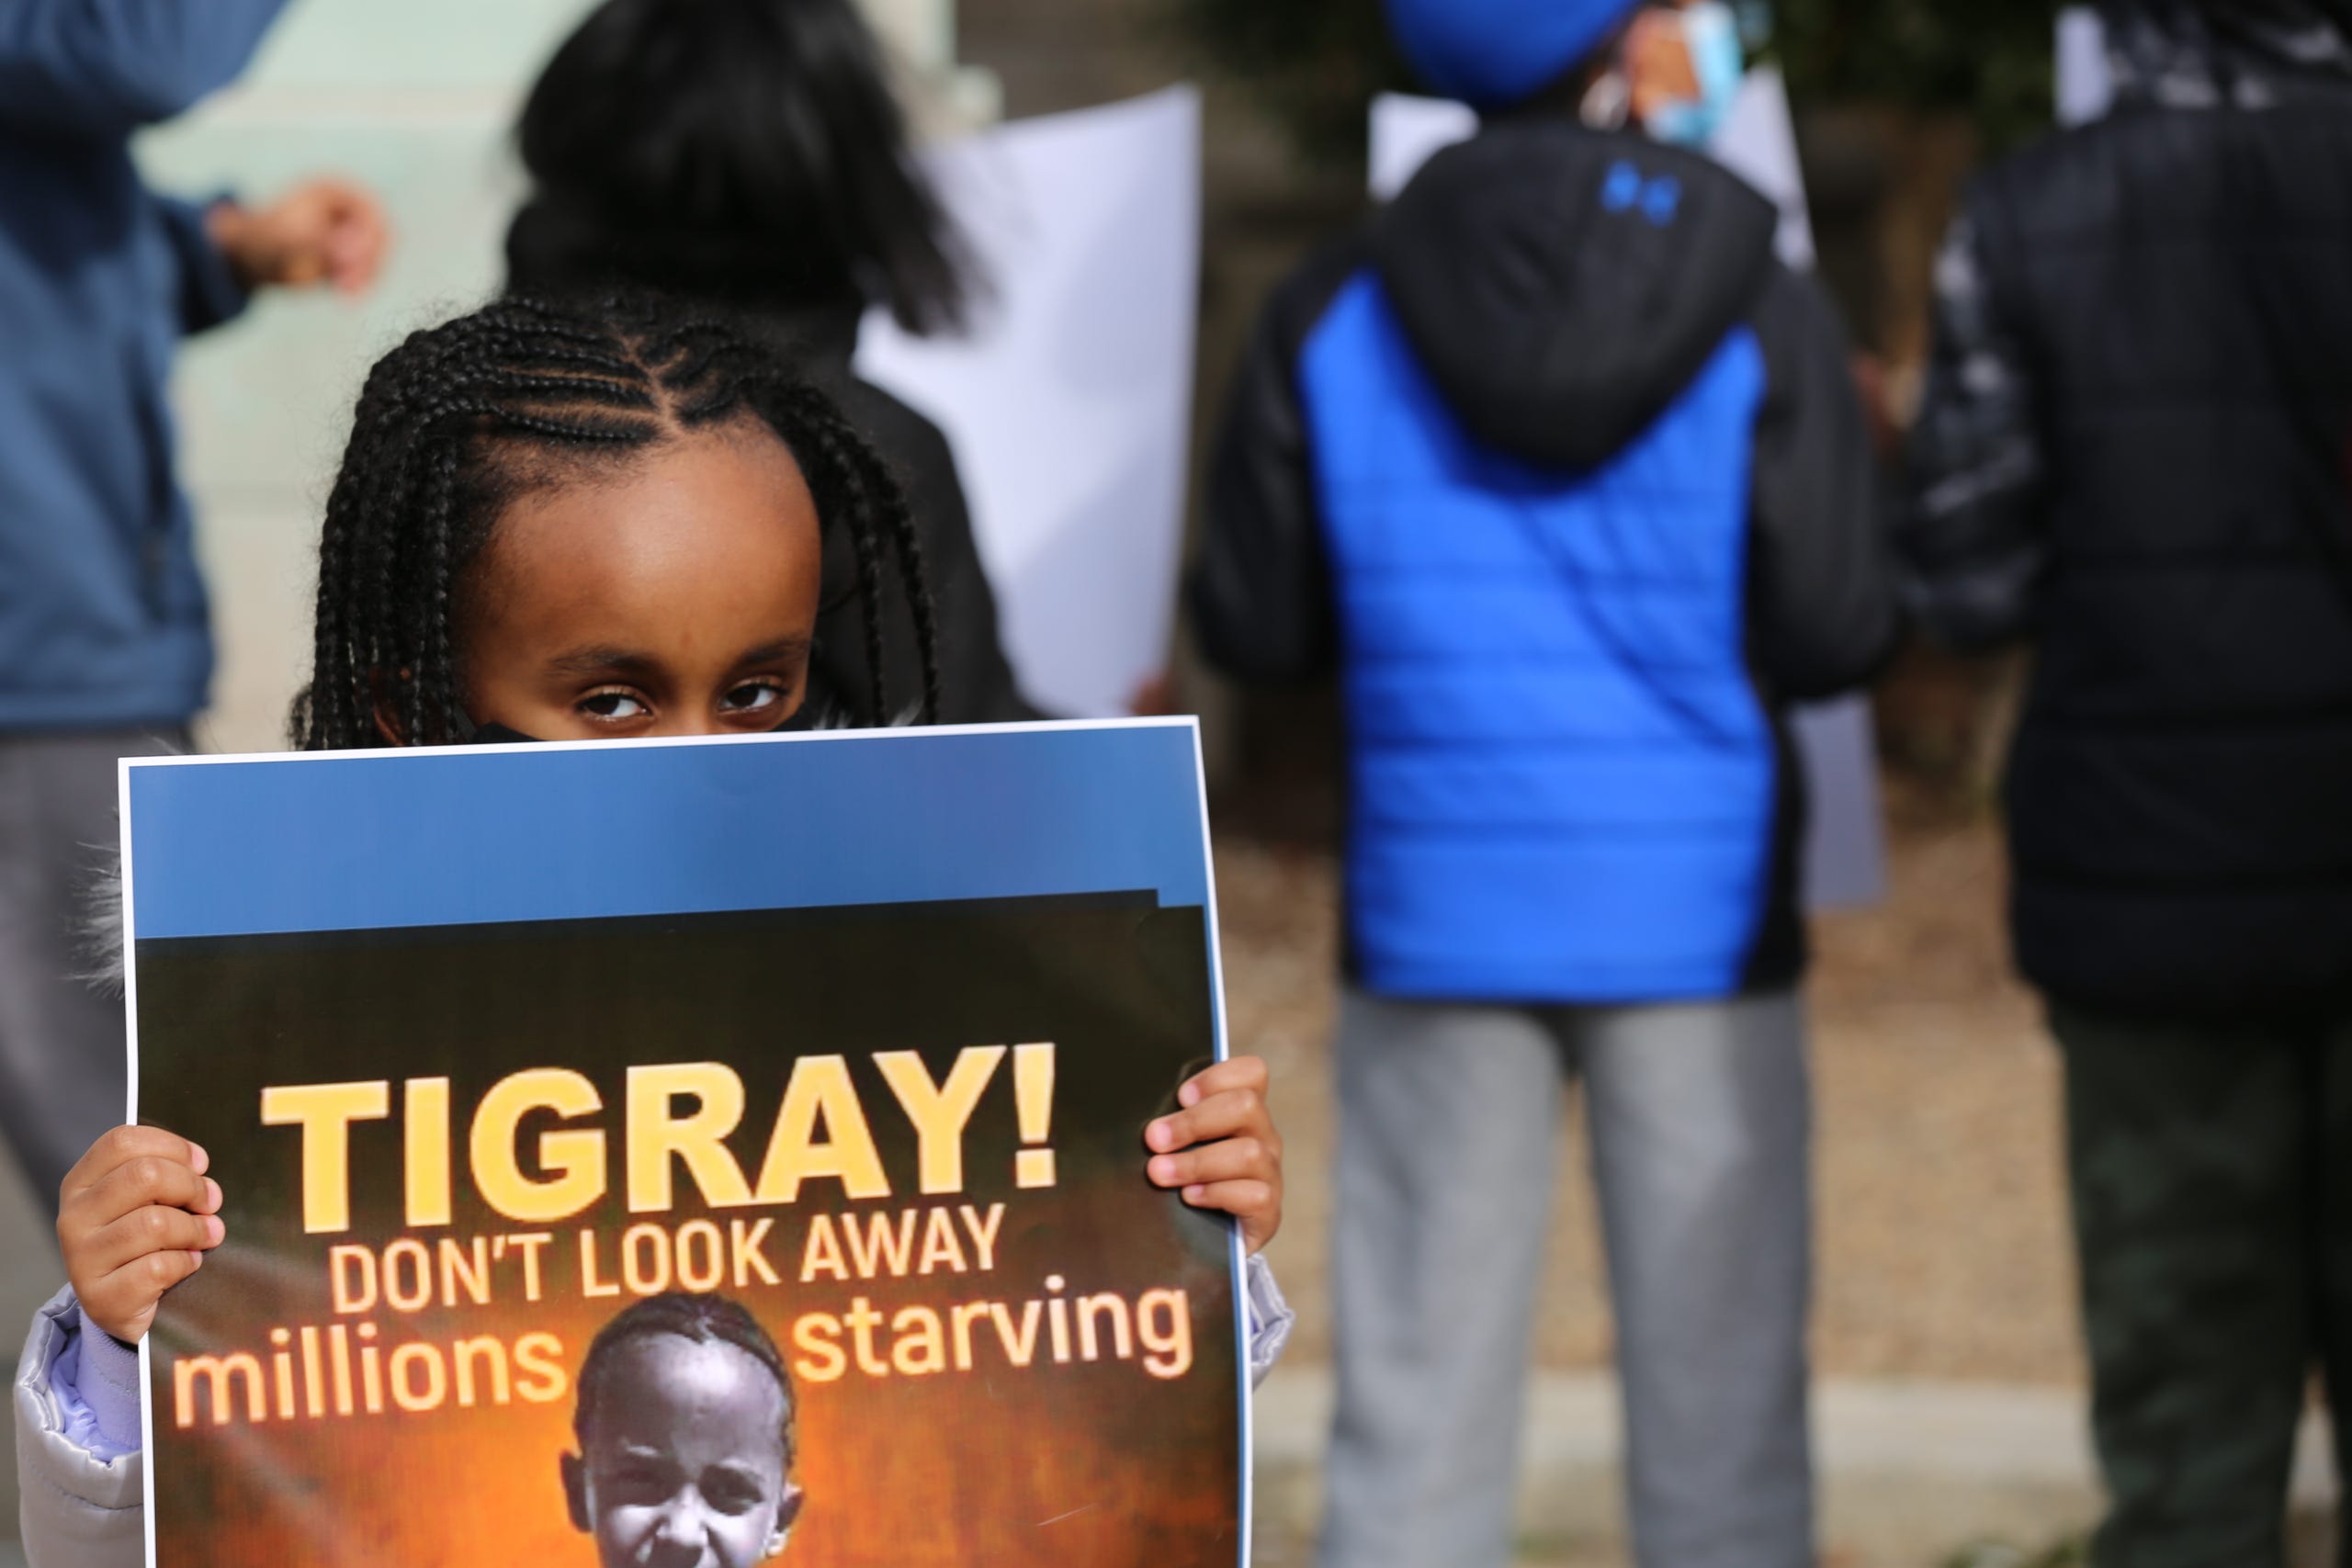 Louisville&rsquo;s Ethiopian community called on the Biden Administration to ramp up pressure to stop the conflict in their nation's Tigray region, which they said has caused a humanitarian disaster.